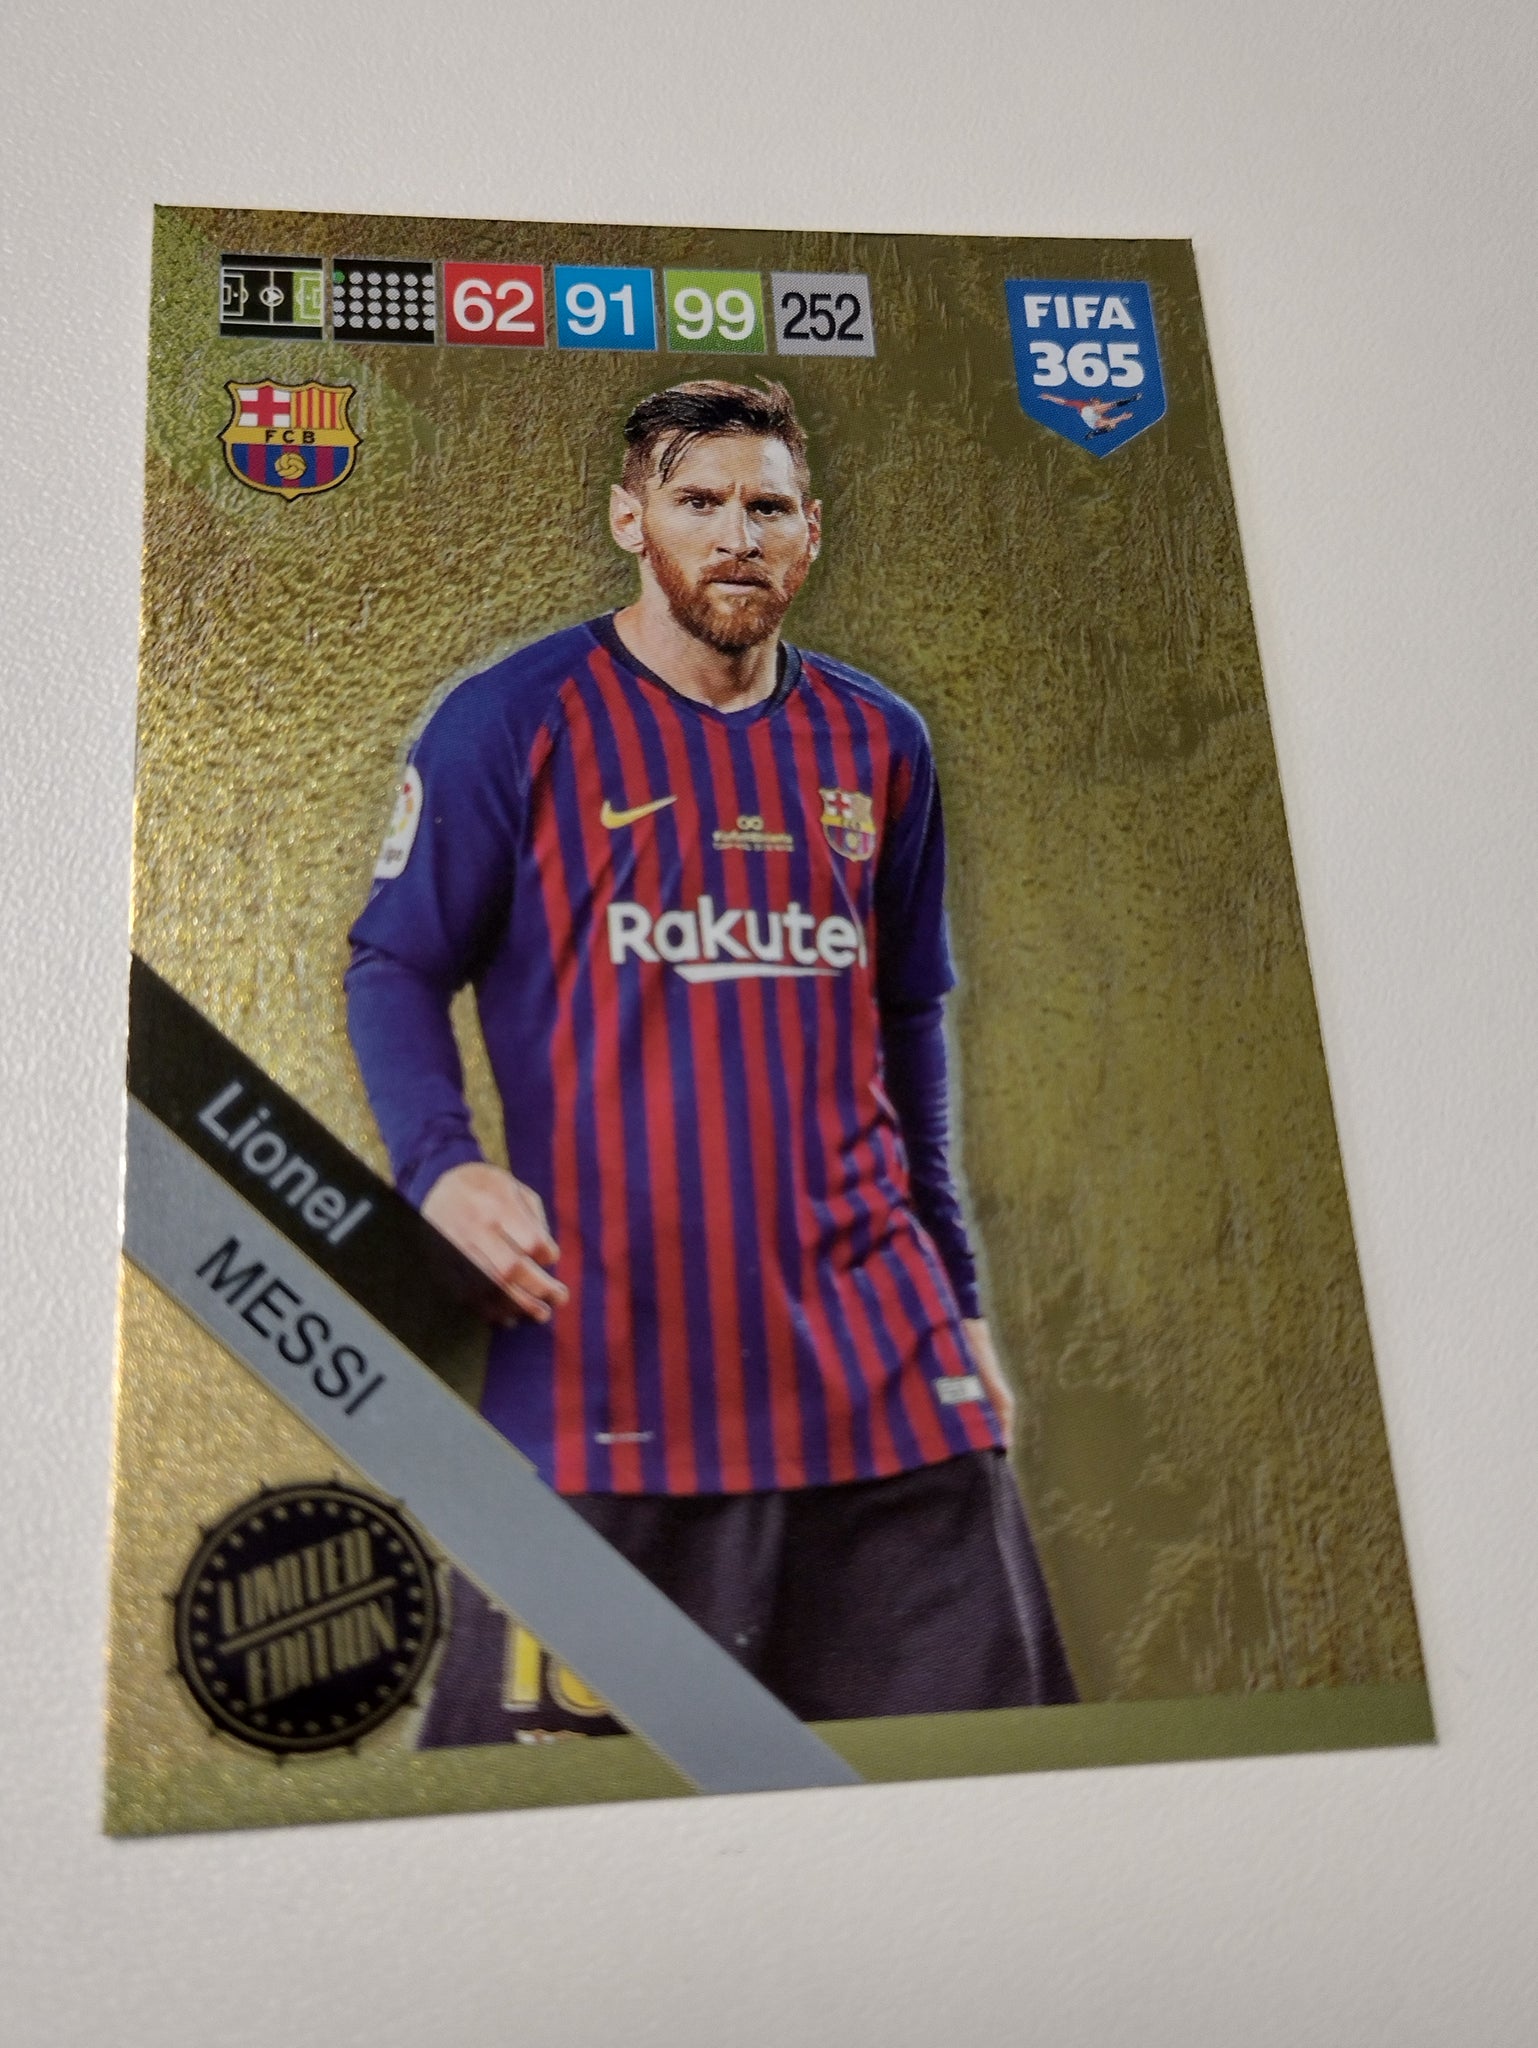 2018 Panini Adrenalyn FIFA 365 Lionel Messi Limited Edition Trading Card